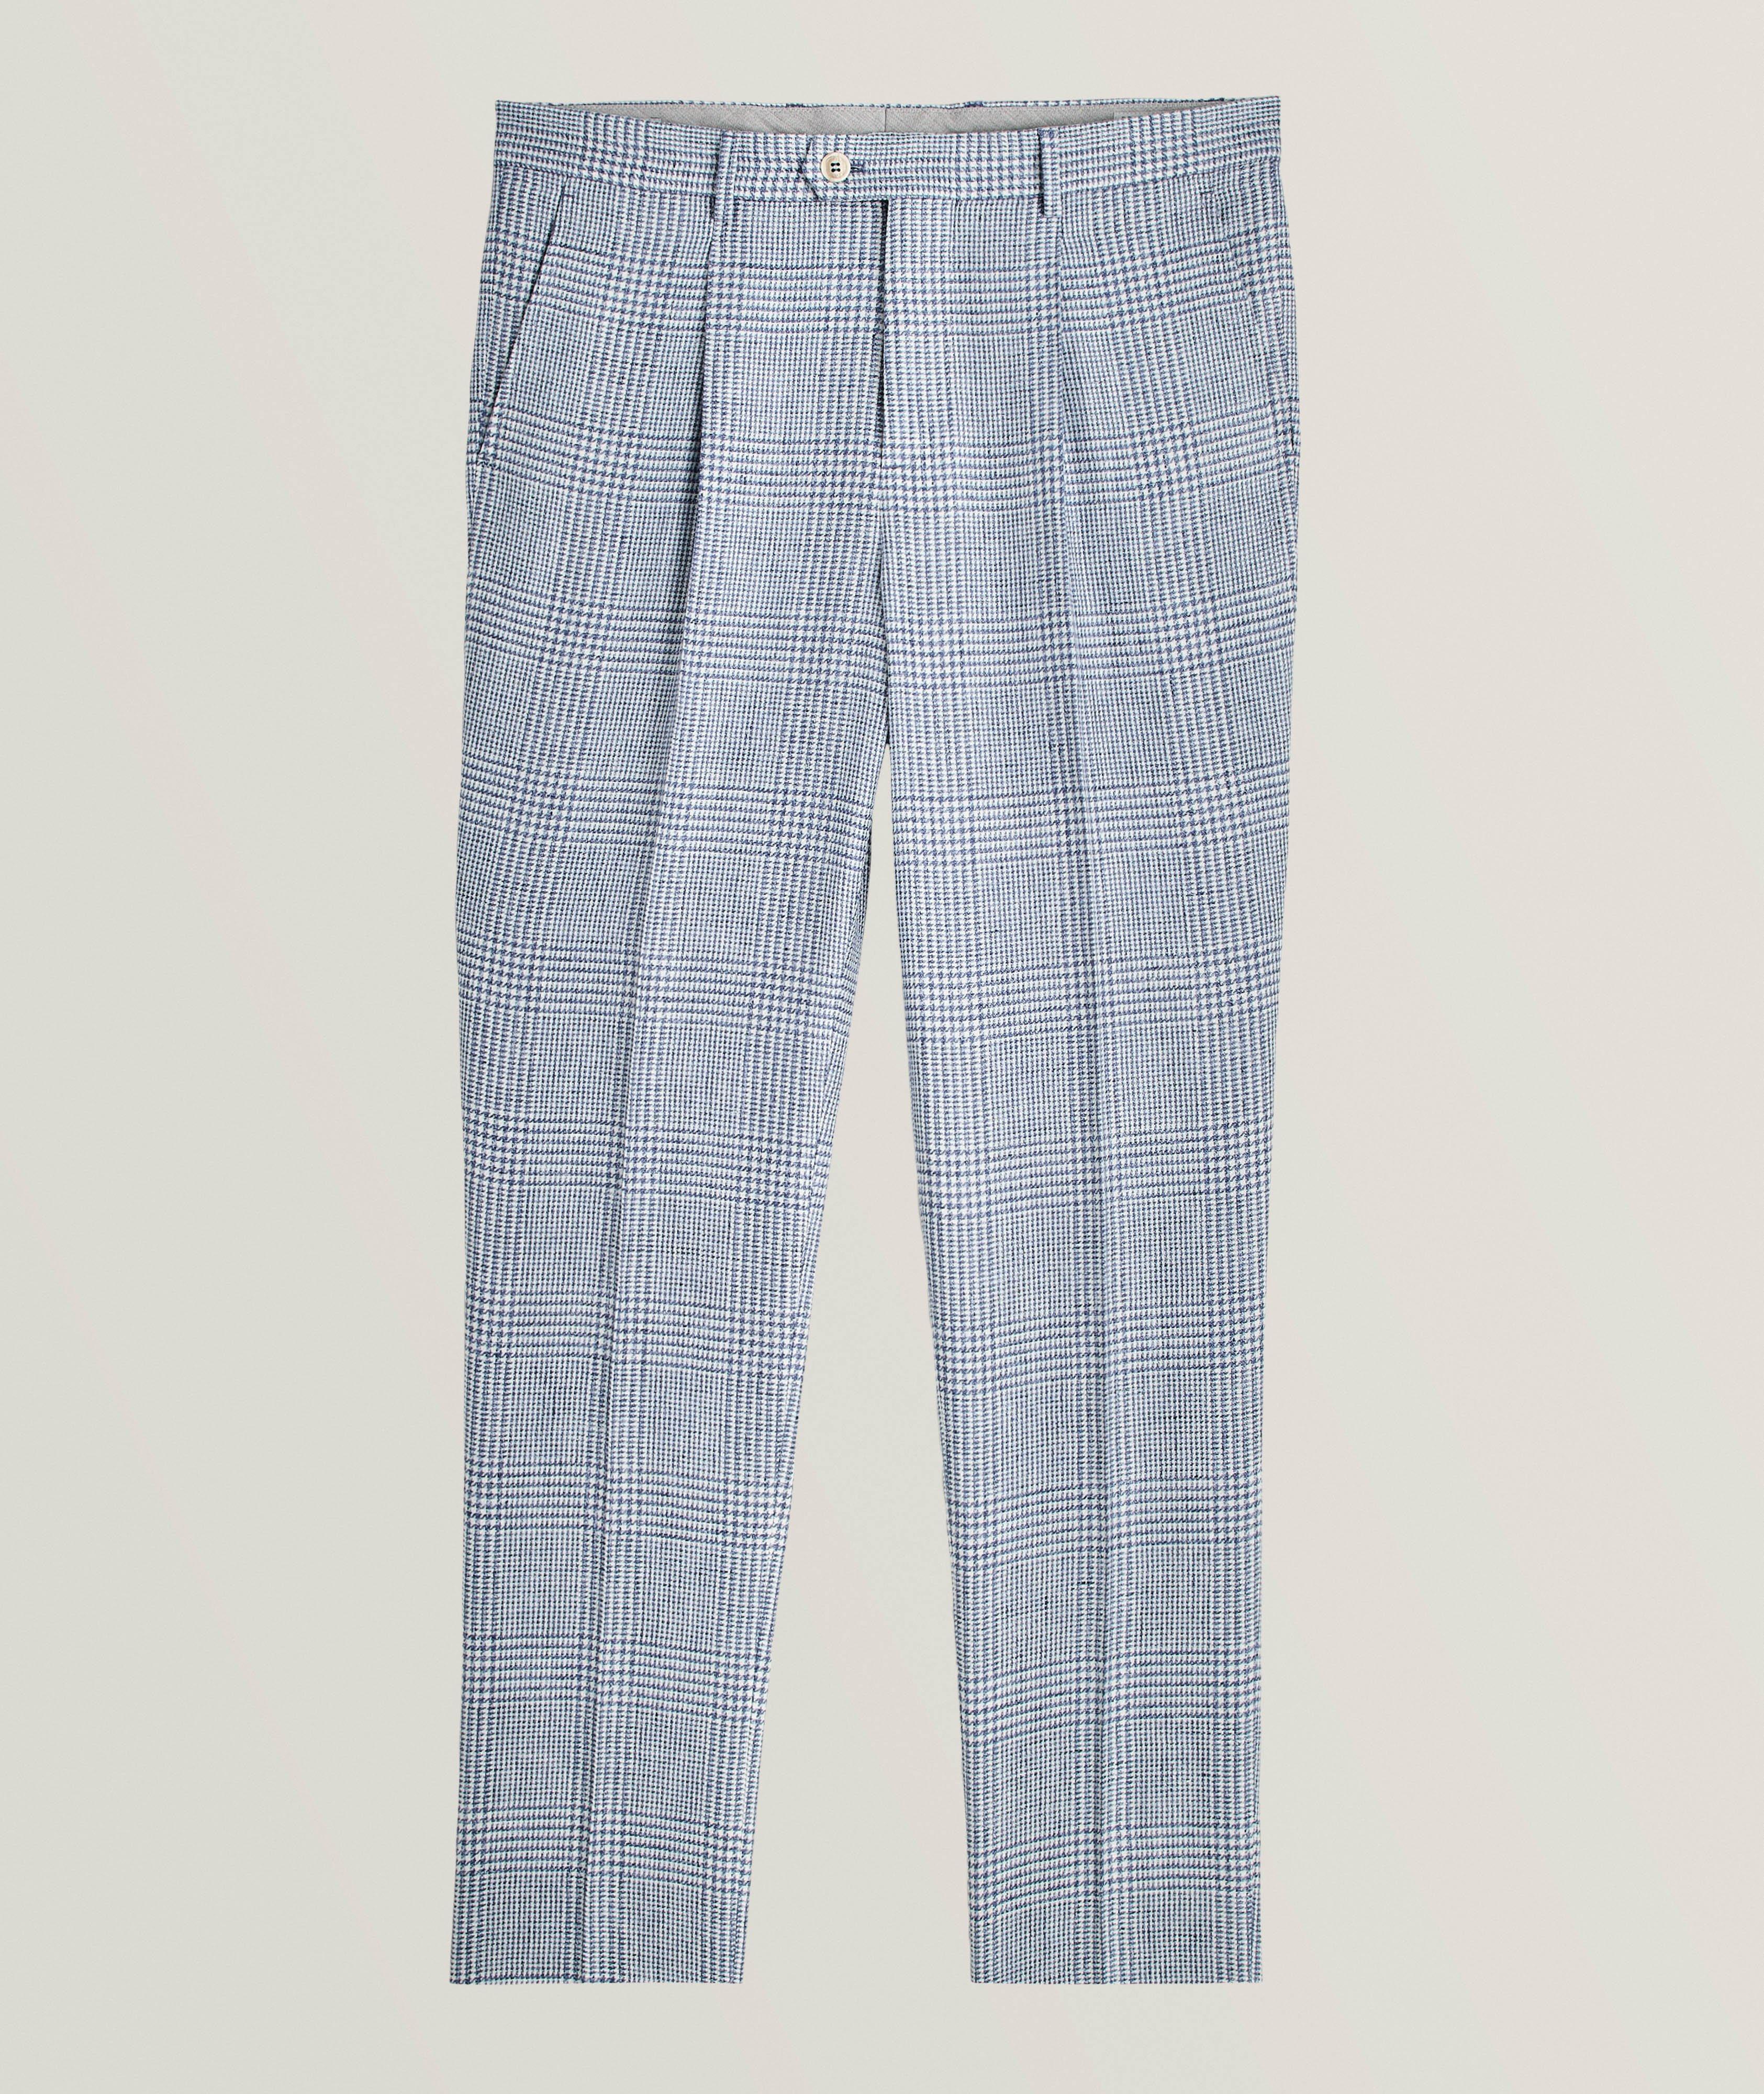 Brunello Cucinelli Houndstooth Single-Pleat Wool-Blend Trousers